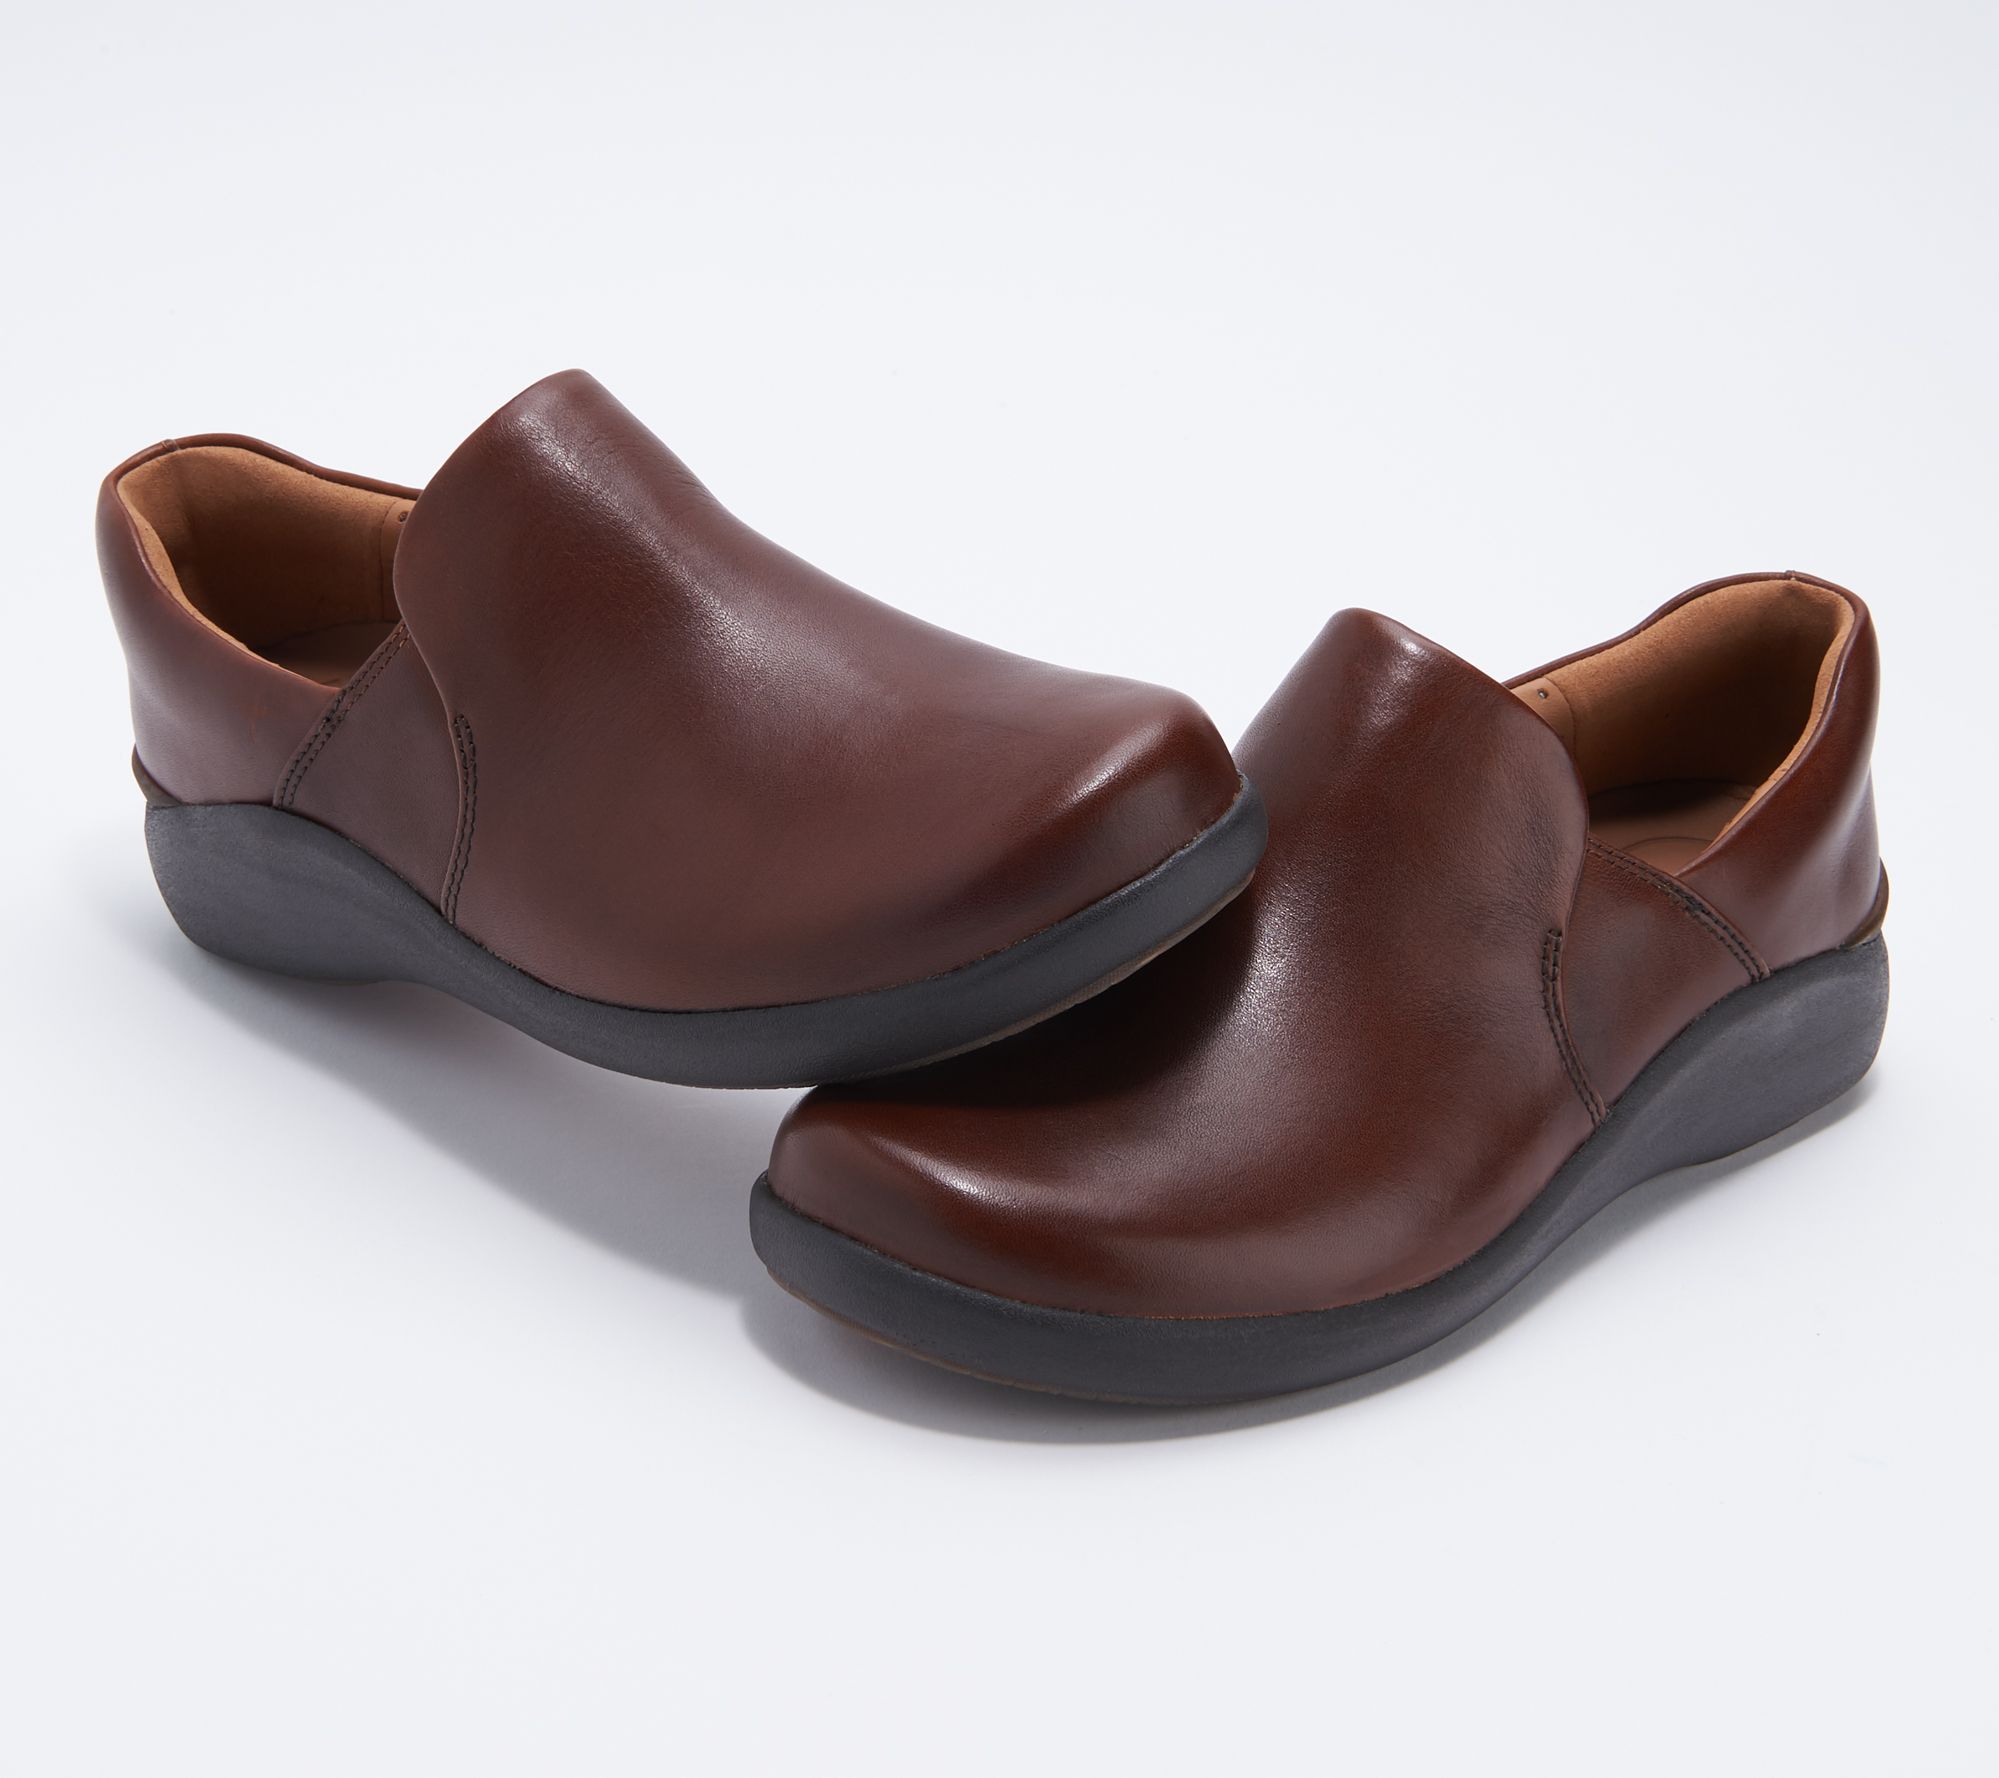 As Is" Clarks Leather Slip-On Shoes- 2 Step - QVC.com